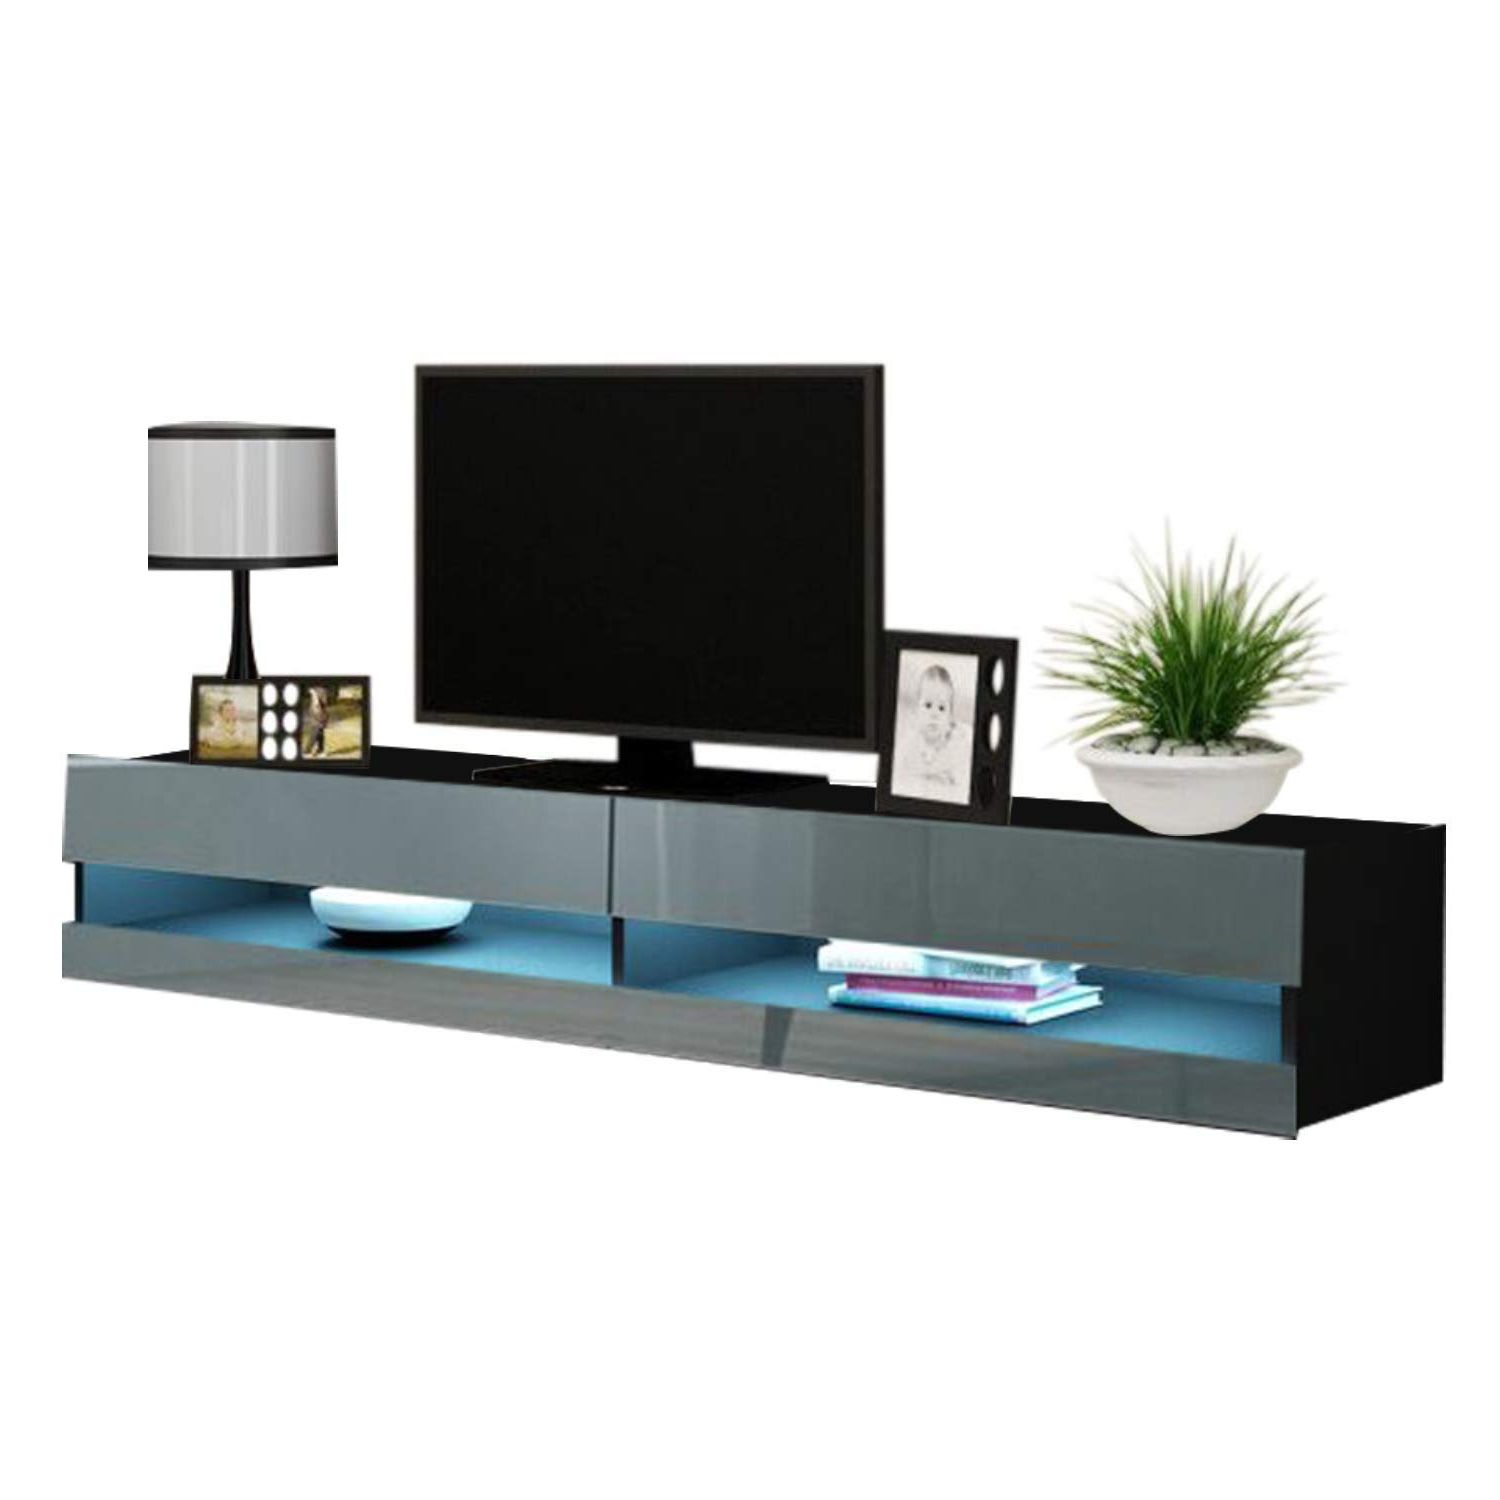 Vigo New 180 Led Wall Mounted 71" Floating Tv Stand, Black With Regard To Polar Led Tv Stands (Gallery 14 of 20)